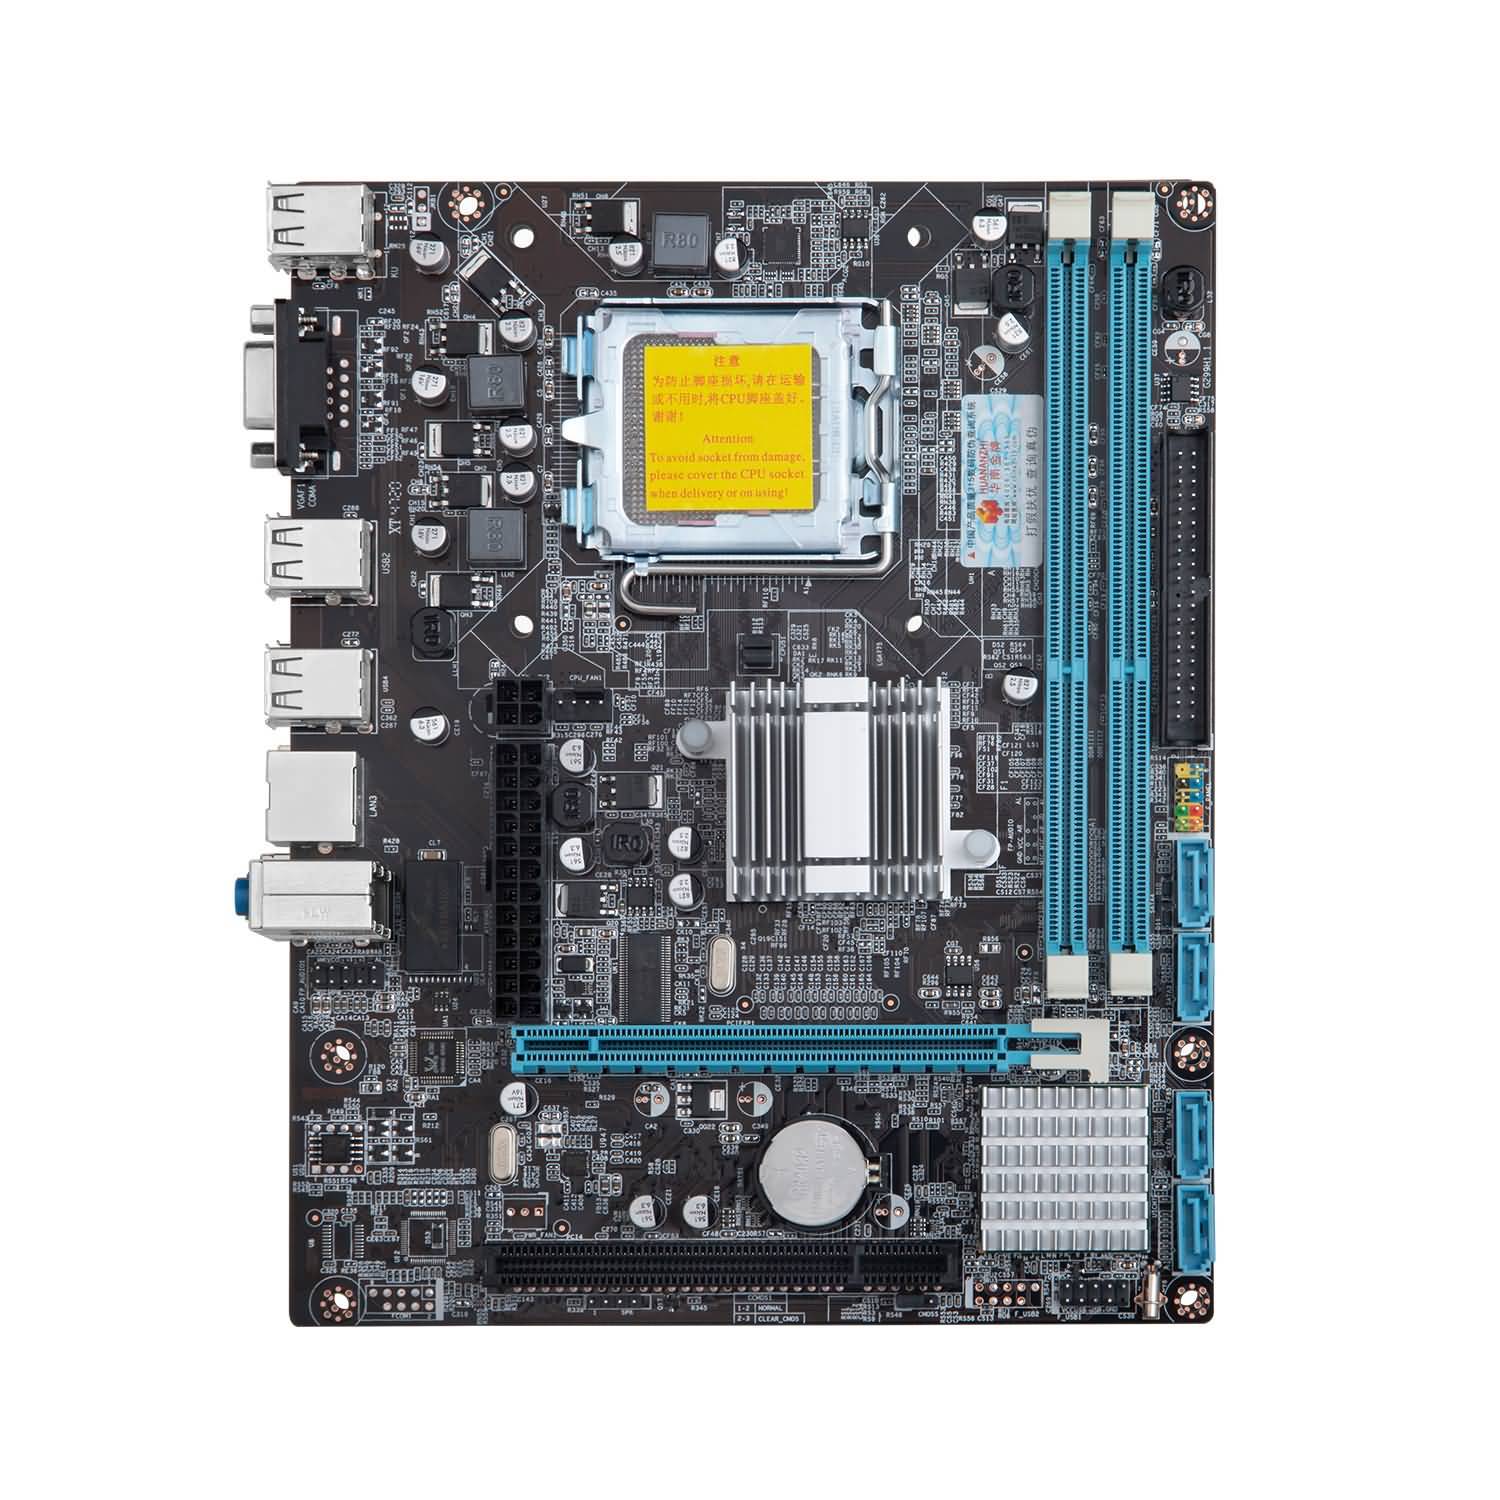 Download Huananzhi G41Motherboard Free